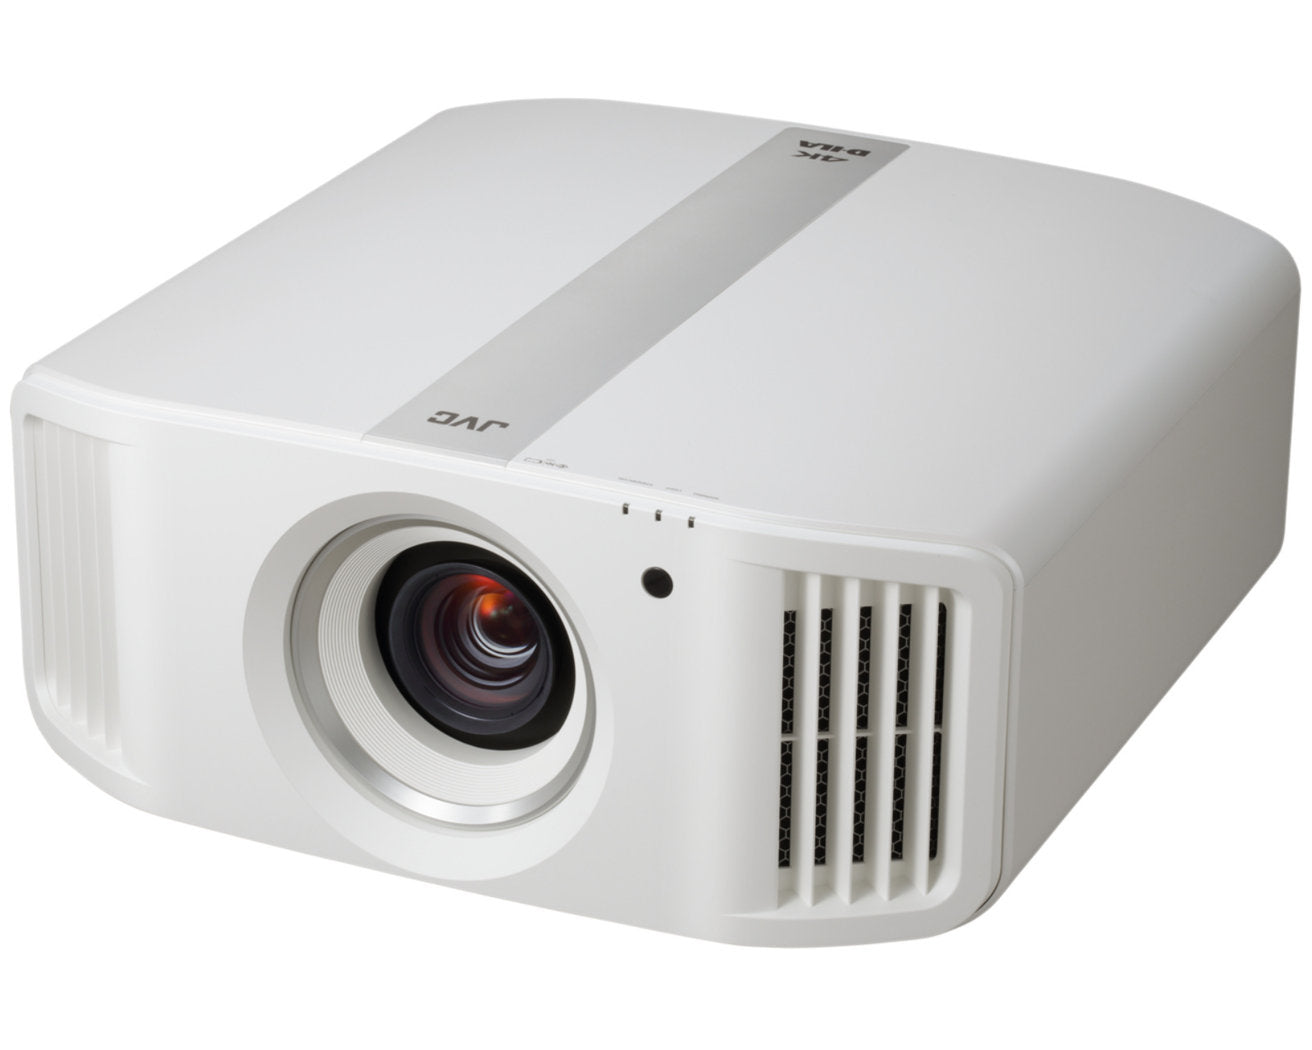 JVC DLA-NP5 4K home theater projector